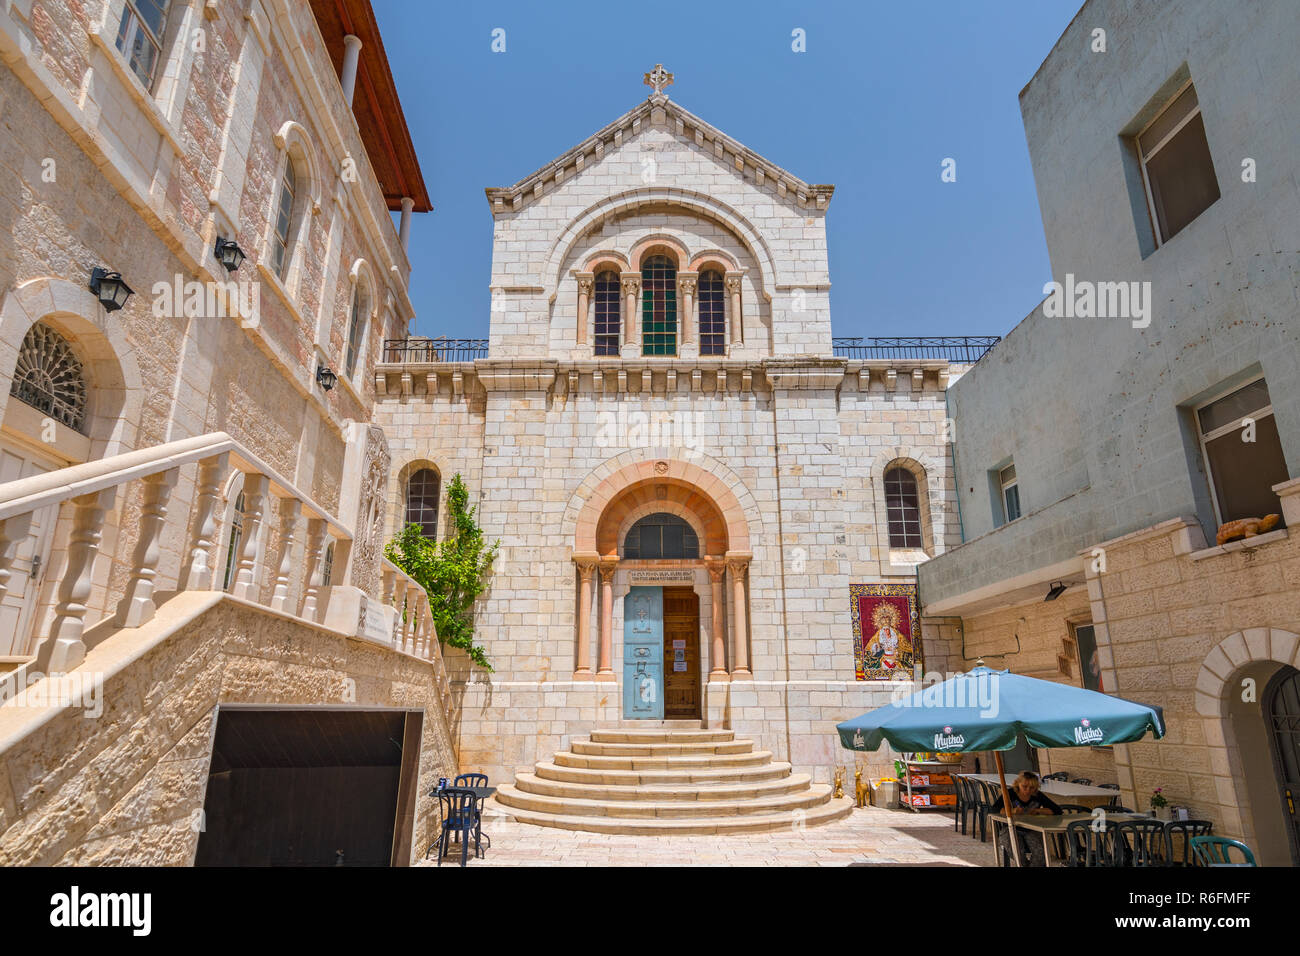 Armenian Catholic Church Of Our Lady Of The Spasm, Fourth Station, Way Of Sorrows, Stations Of The Cross In Jerusalem Old City, Israel Stock Photo